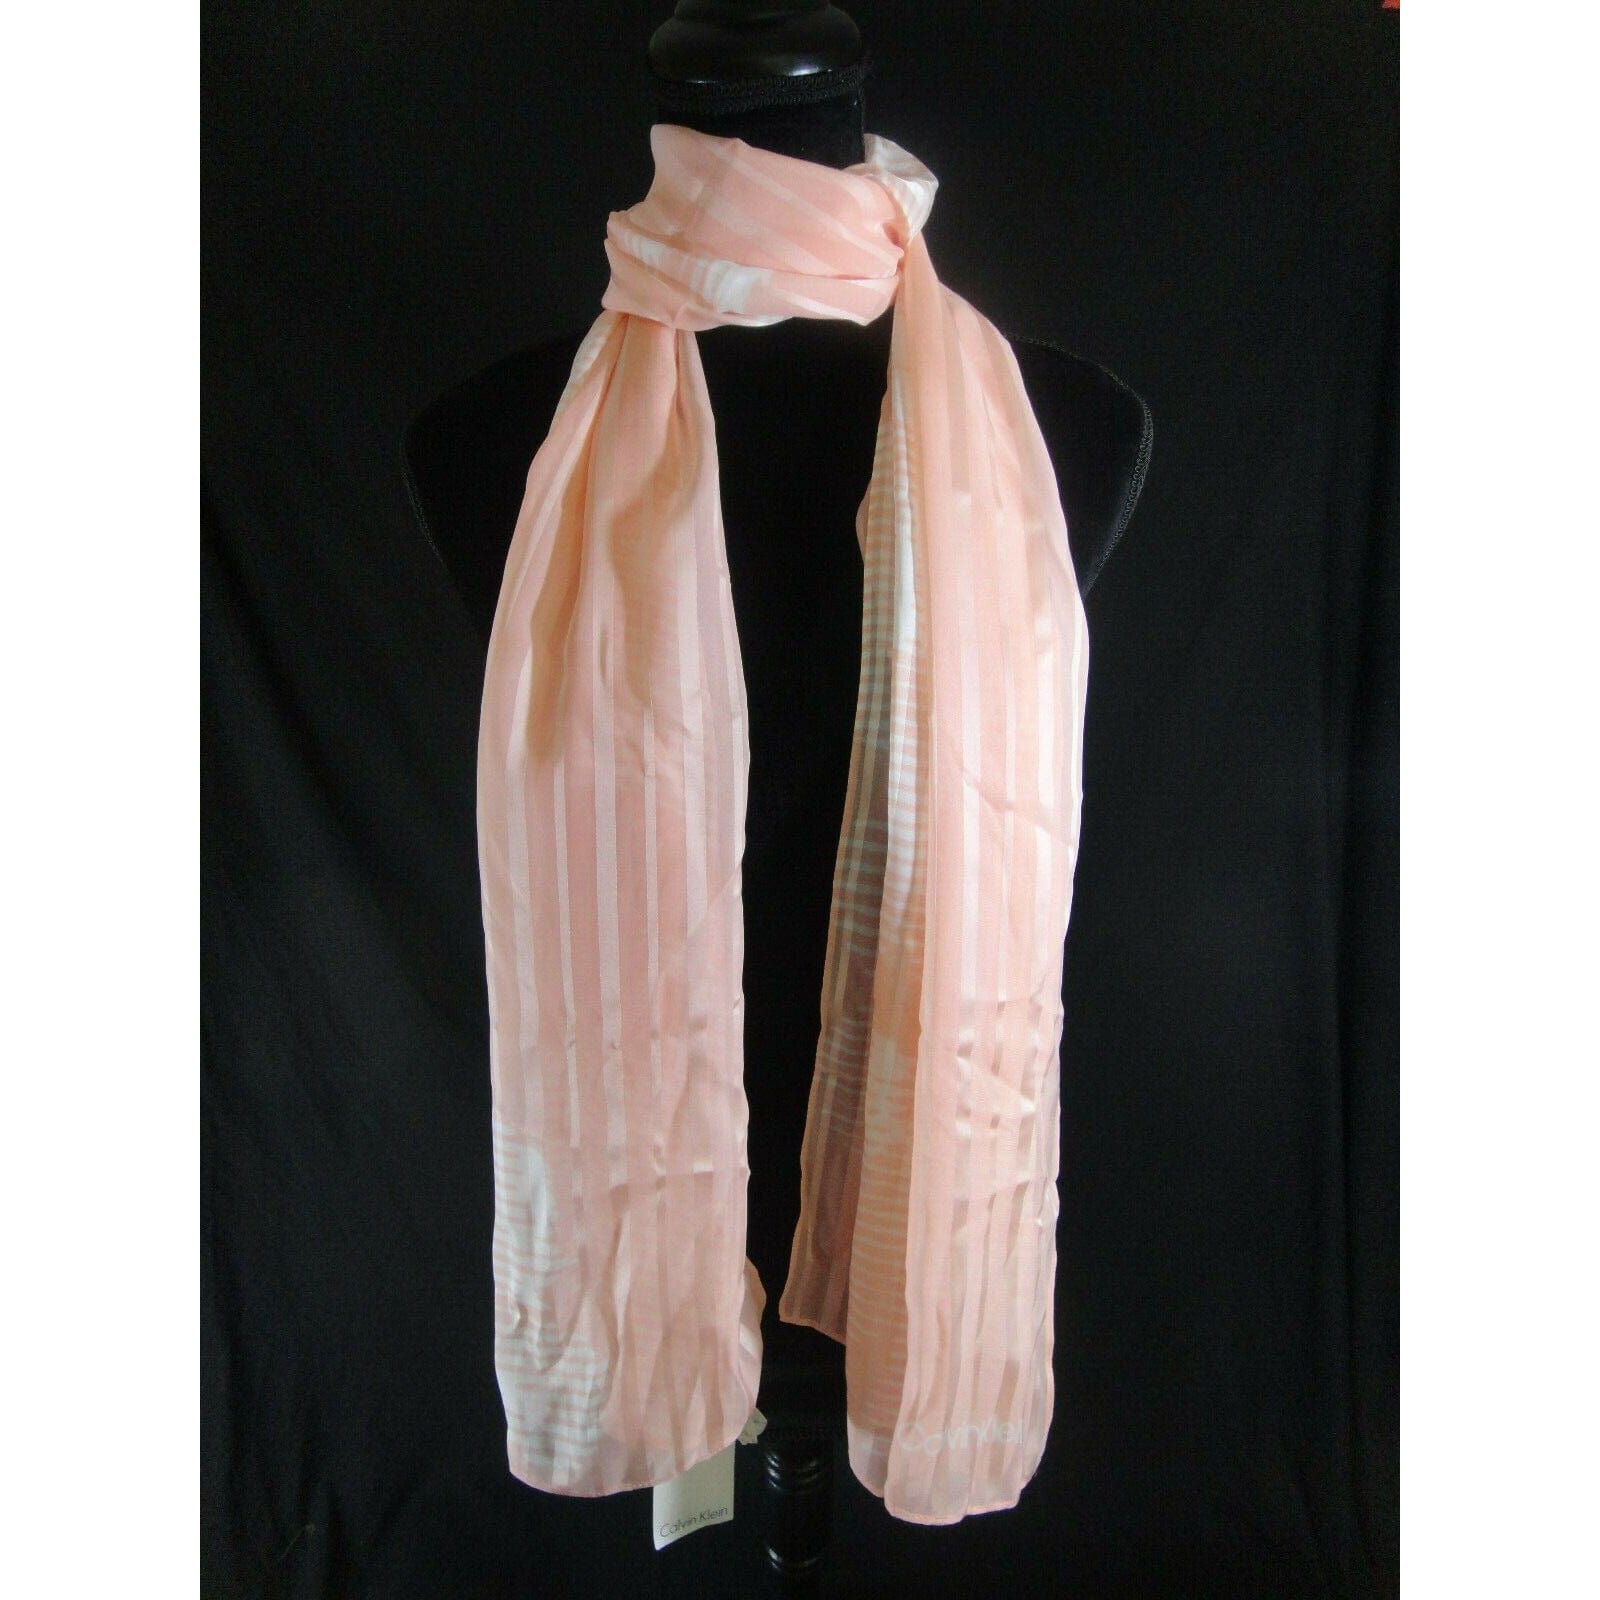 Calvin Klein Graphic Peach Striped Floral Chiffon Scarf - The Pink Pigs, A Compassionate Boutique